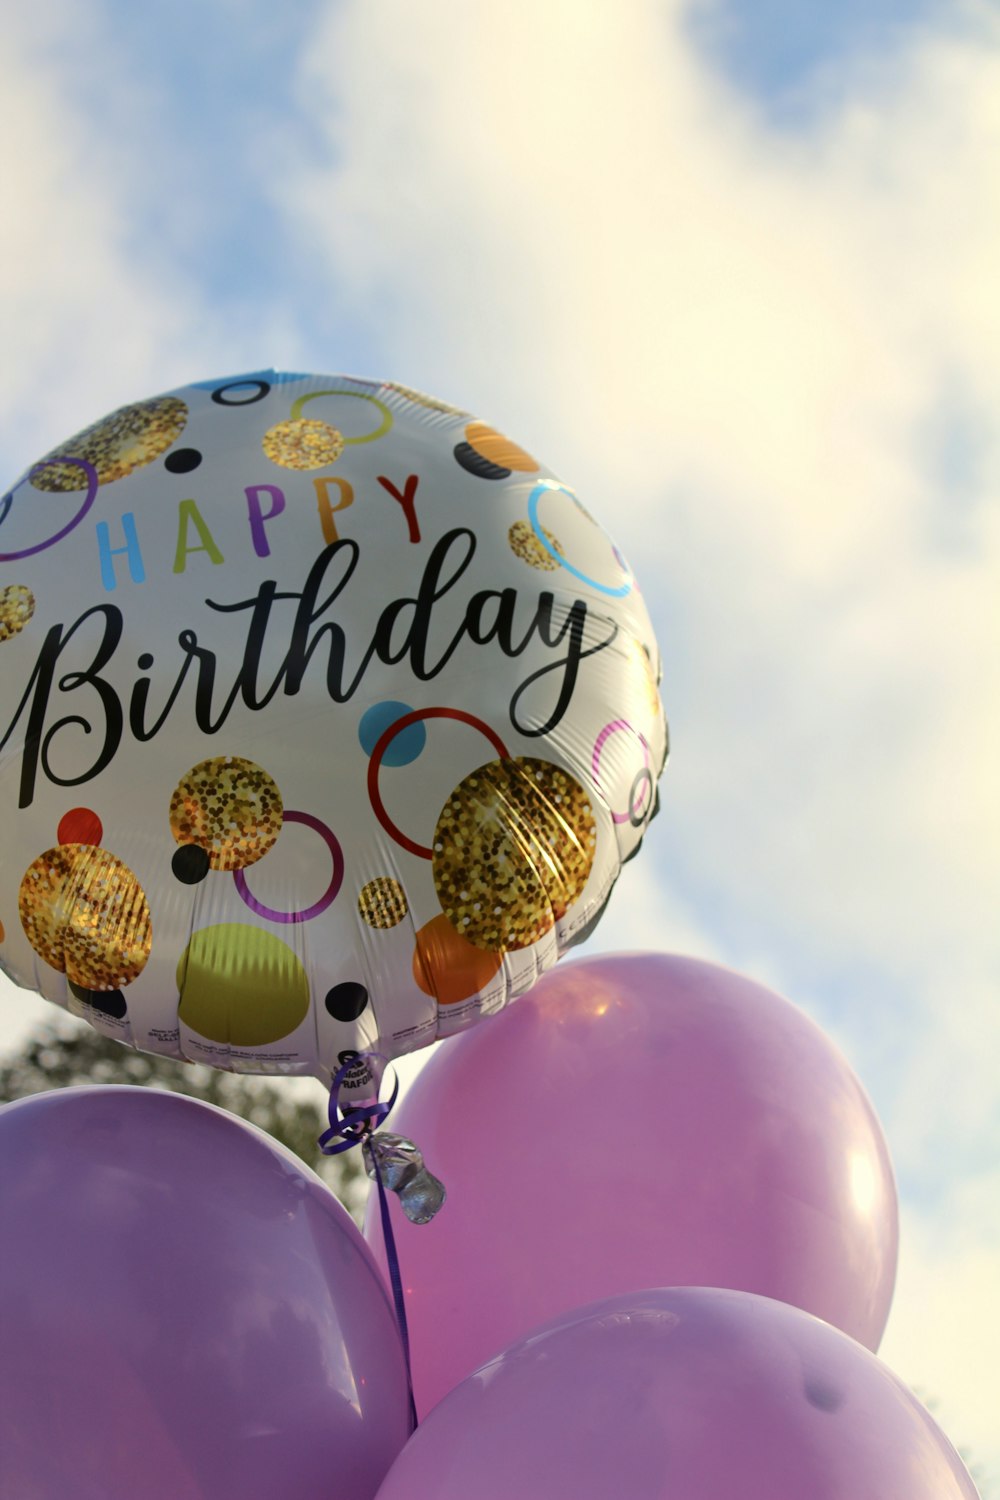 550+ Birthday Balloons Pictures | Download Free Images on Unsplash